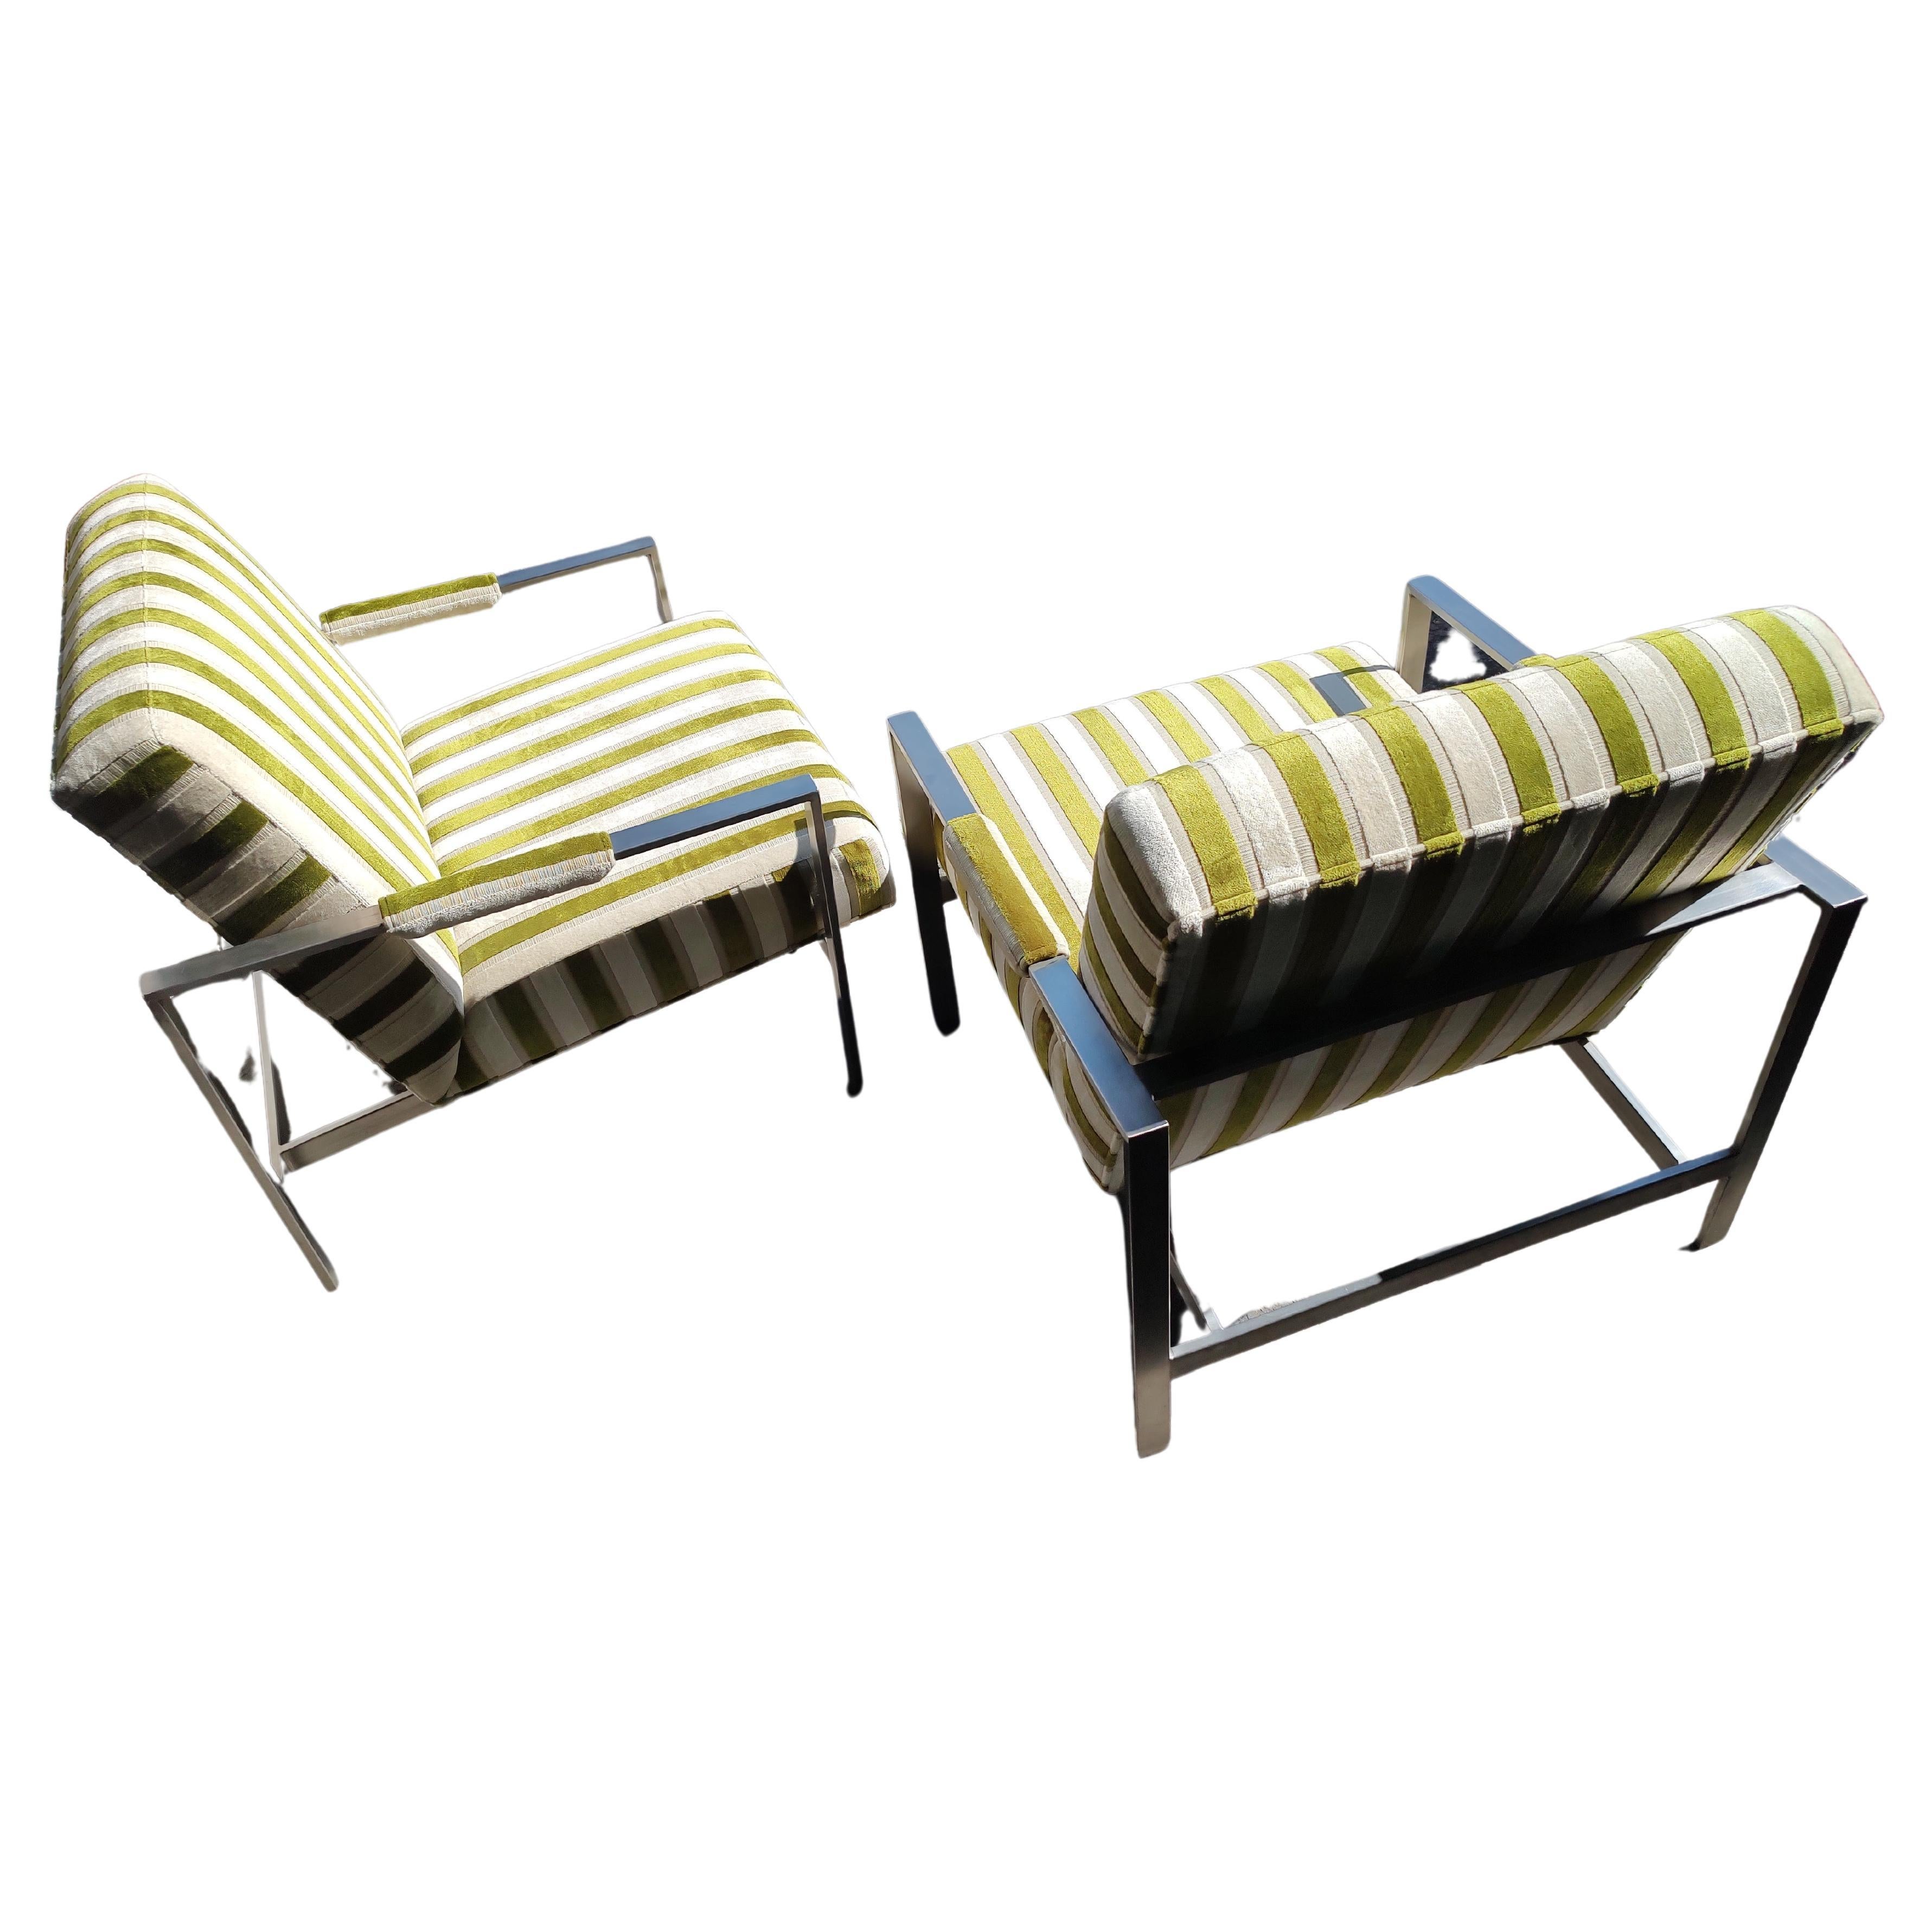 Fabulous pair of very elegant Mid-Century Modern style lounge chairs by Thayer Coggin with a definite influence by Milo Baughman. Striped green velvet with a pale ivory. Brushed stainless steel frames in excellent vintage condition with minimal